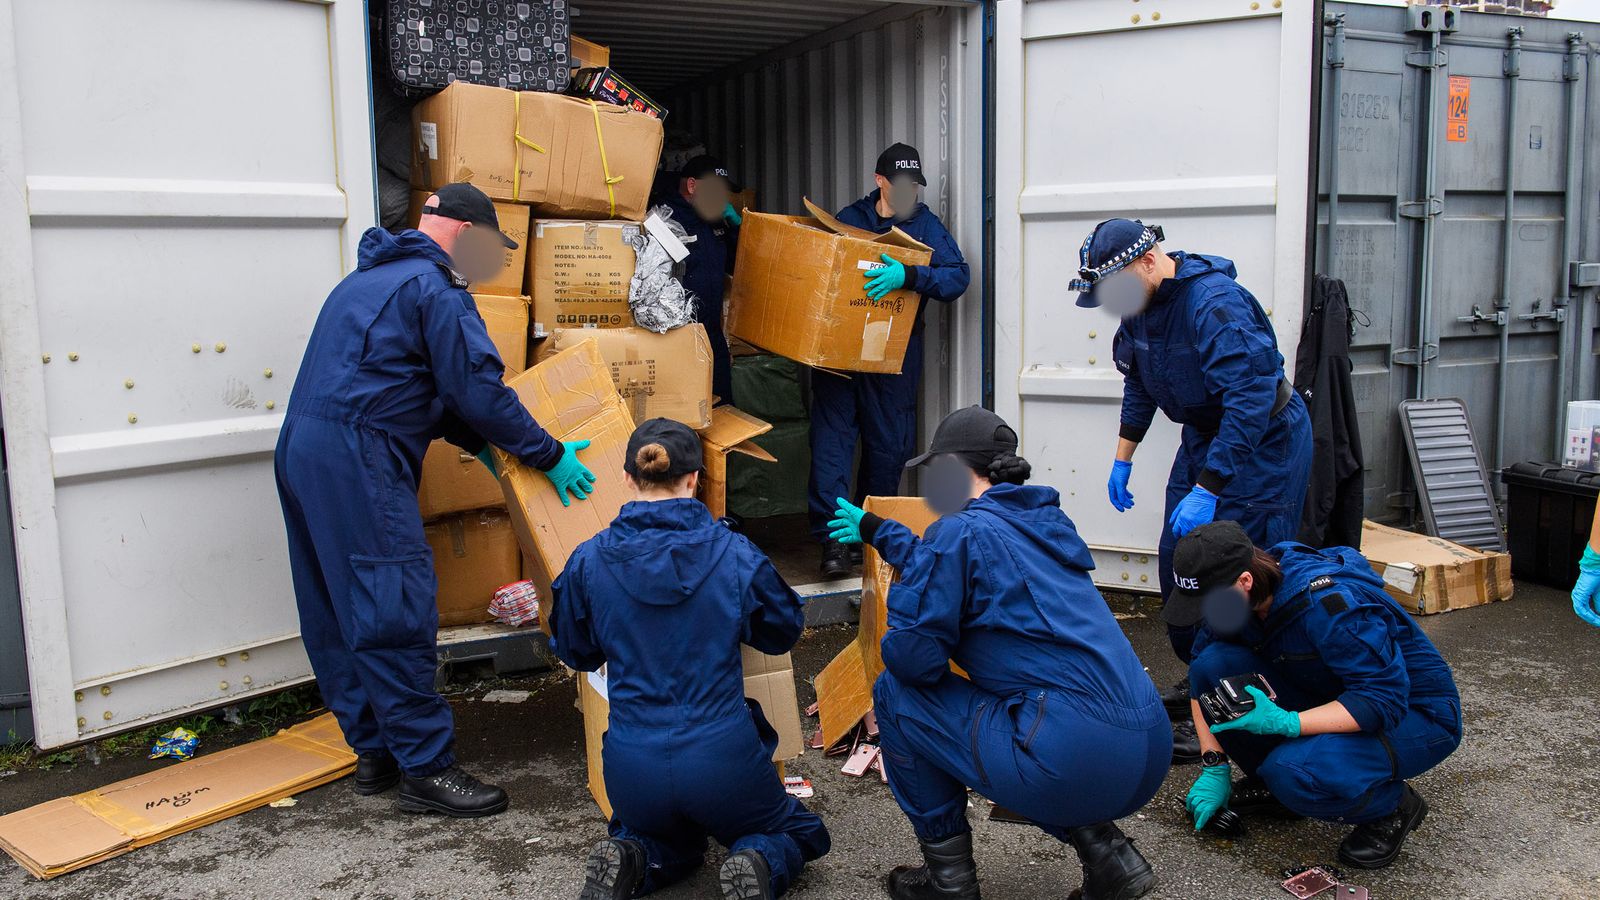 Counterfeit goods worth record £870m found as police raid shipping containers in Manchester